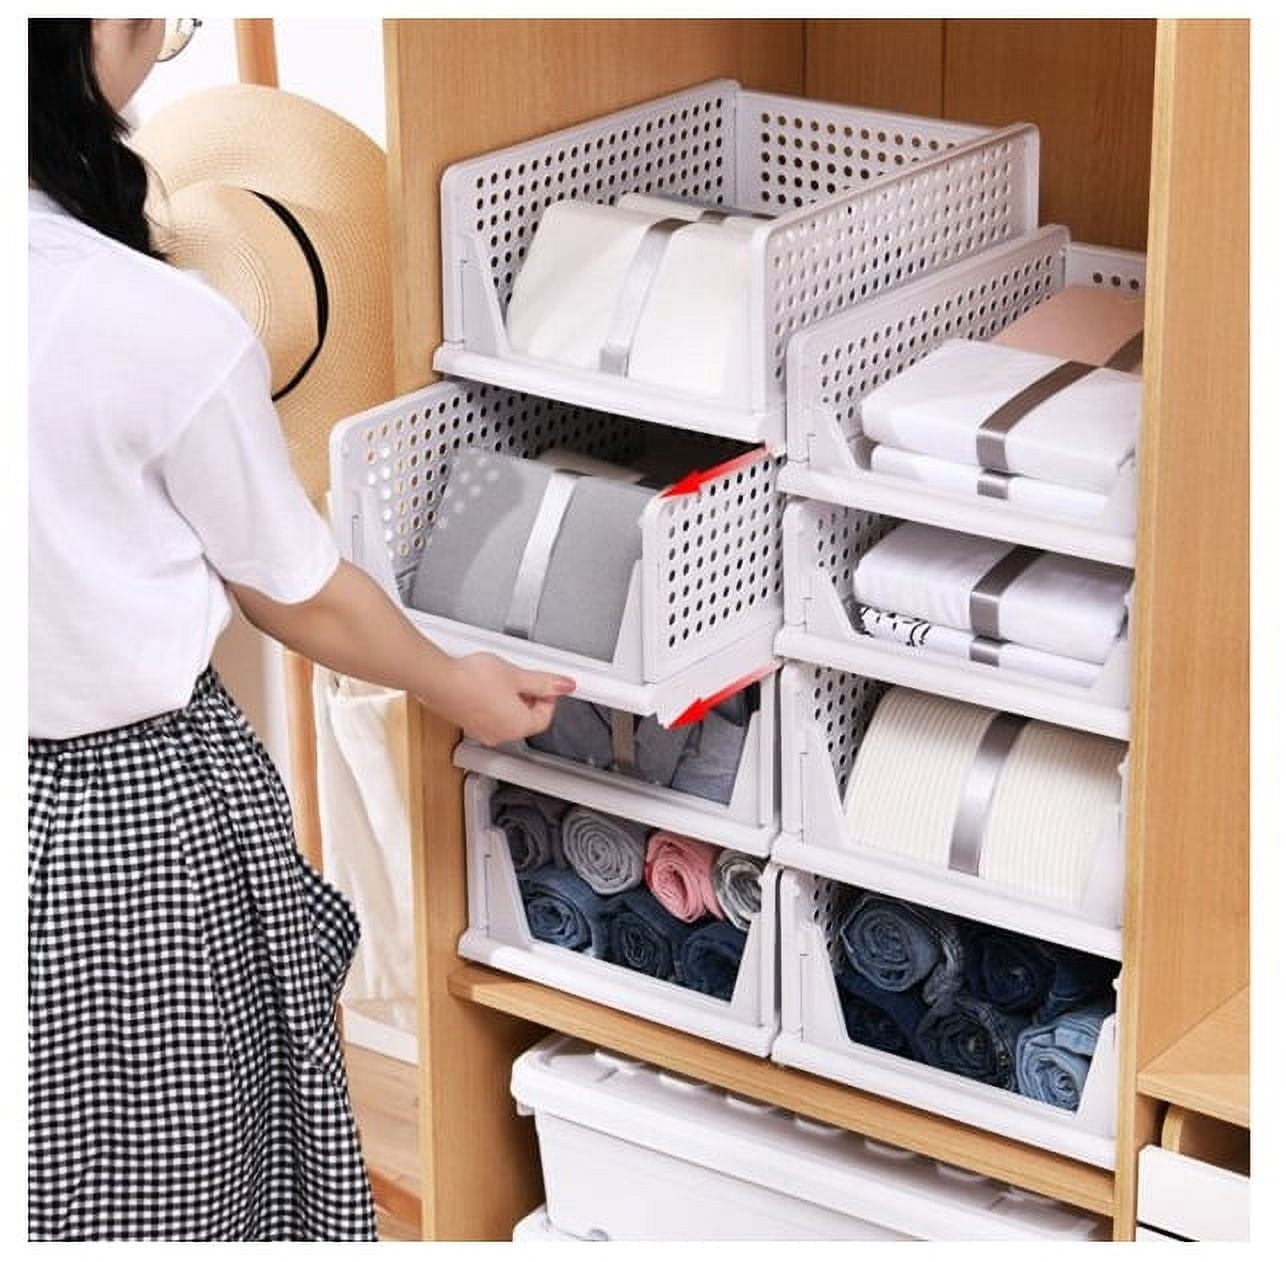 Mupera Storage Drawers Clothes Stackable - White Plastic Folding Storage Plastic Bin, Push-Pull Clothes Organizer Shelf, Collapsible Storage Box for